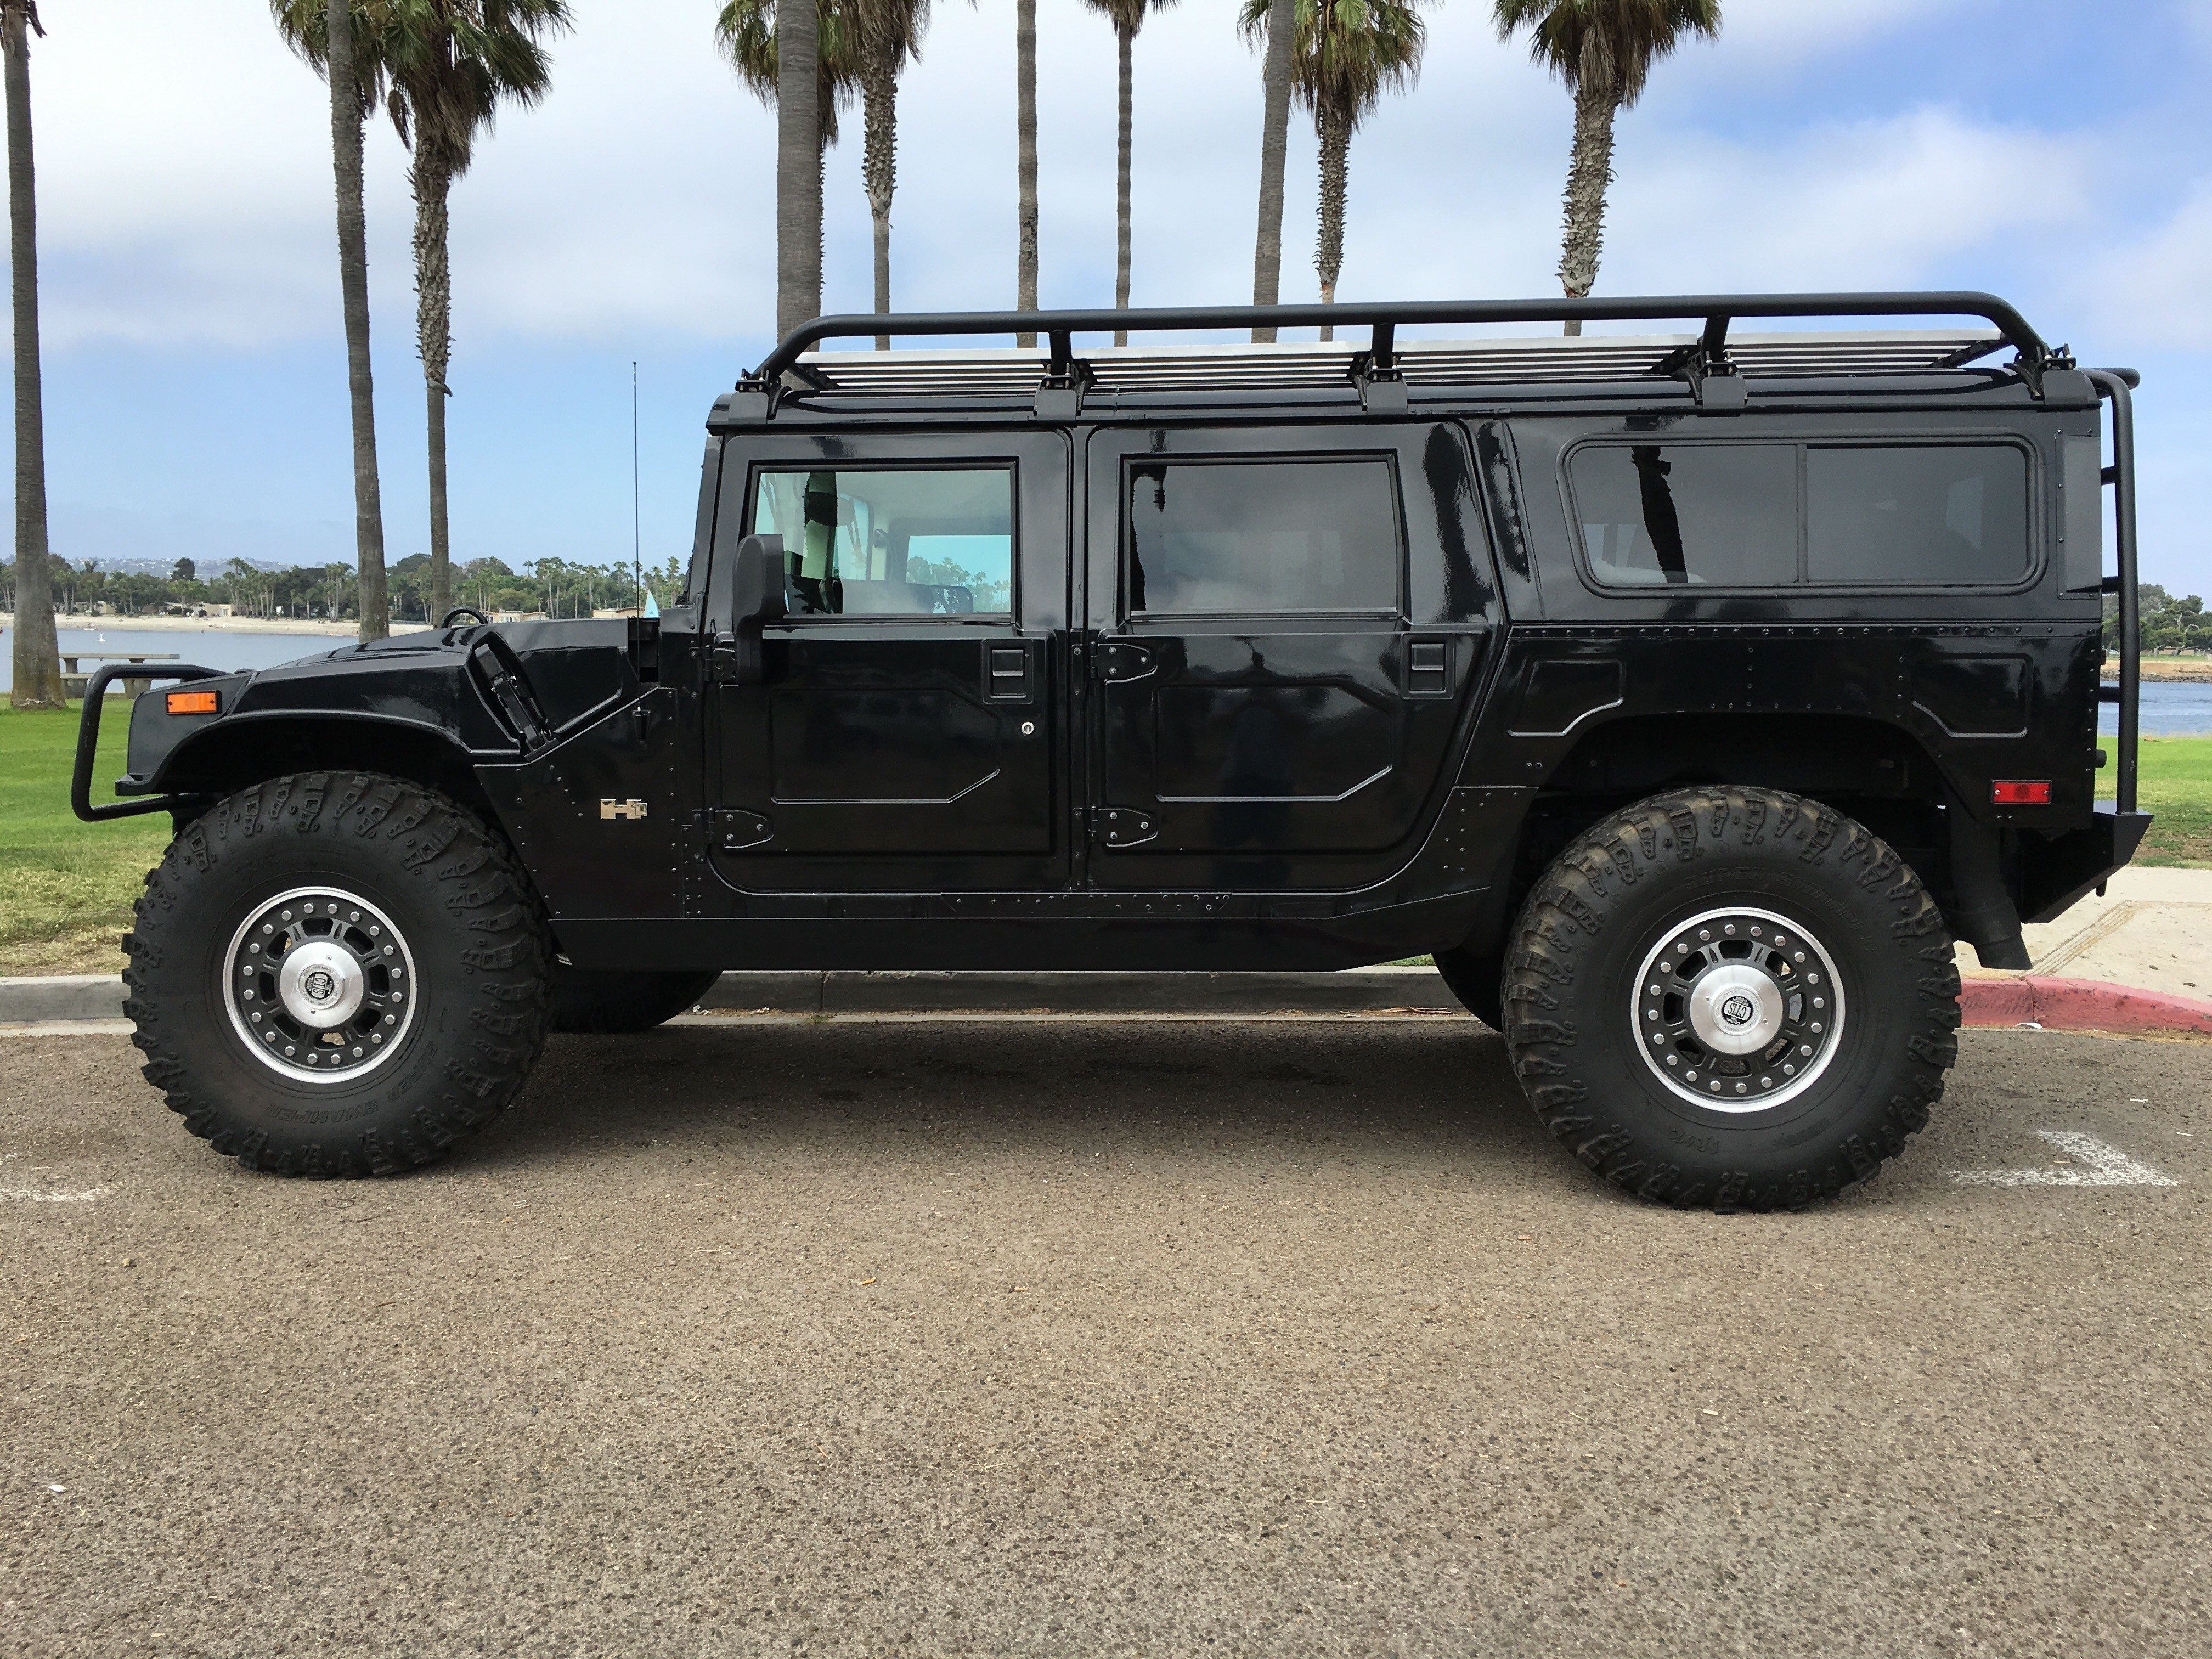 For sale : 2006 Hummer H1 Alpha “Search and Rescue edition”